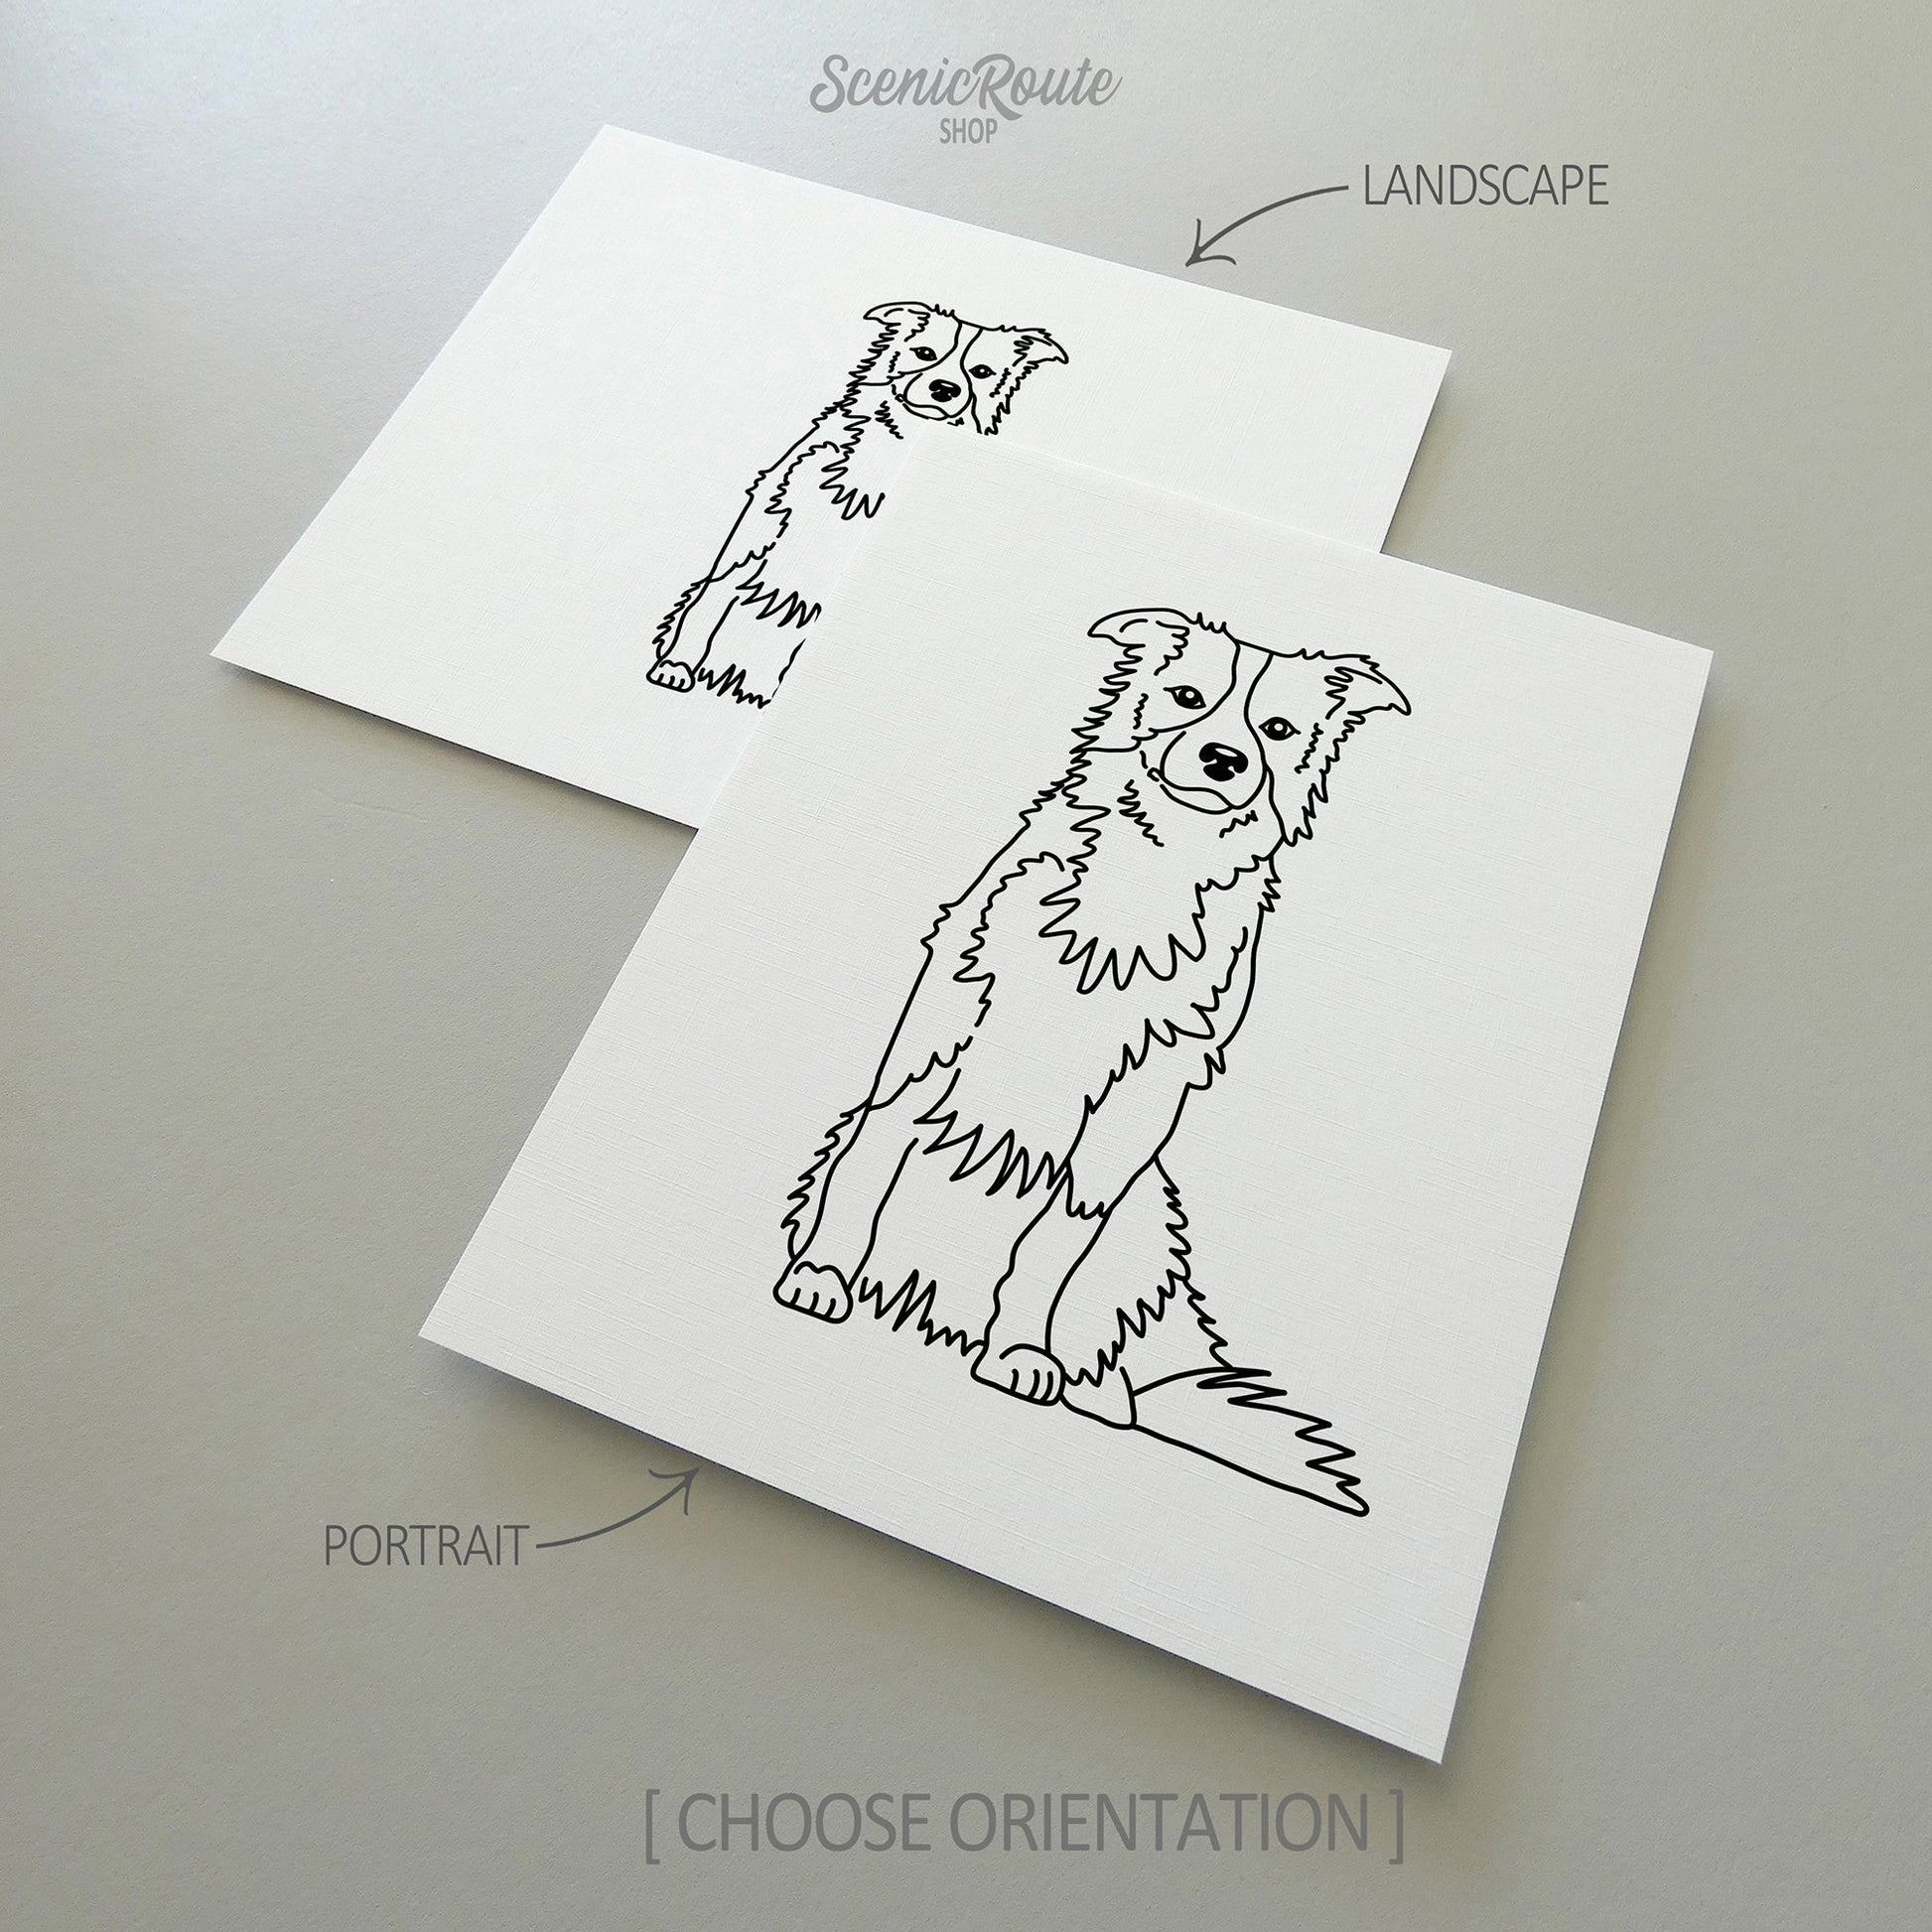 Two drawings of a Border Collie dog on white linen paper with a gray background.  Pieces are shown in portrait and landscape orientation options to illustrate the available art print options.